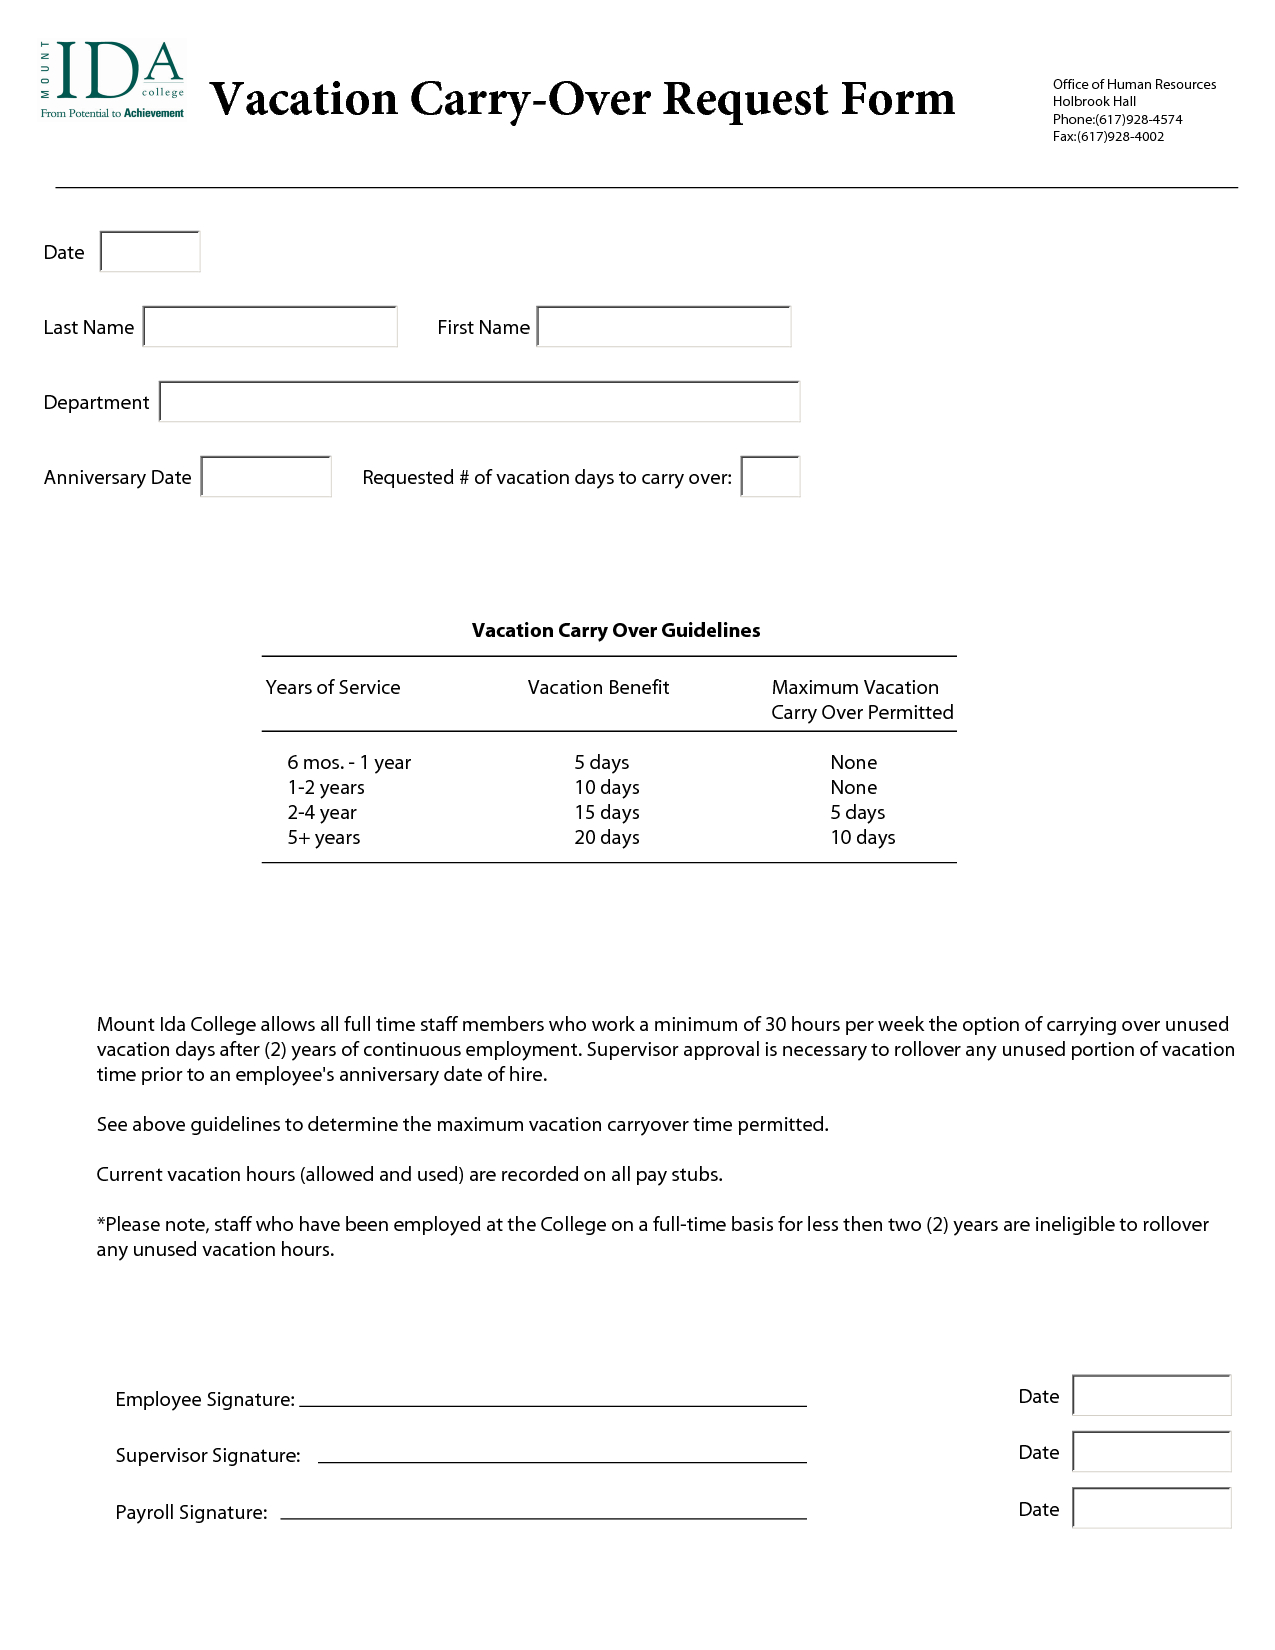 Annual Leave Request Form Template | Vacation Request Form Regarding Certificate Of Disposal Template